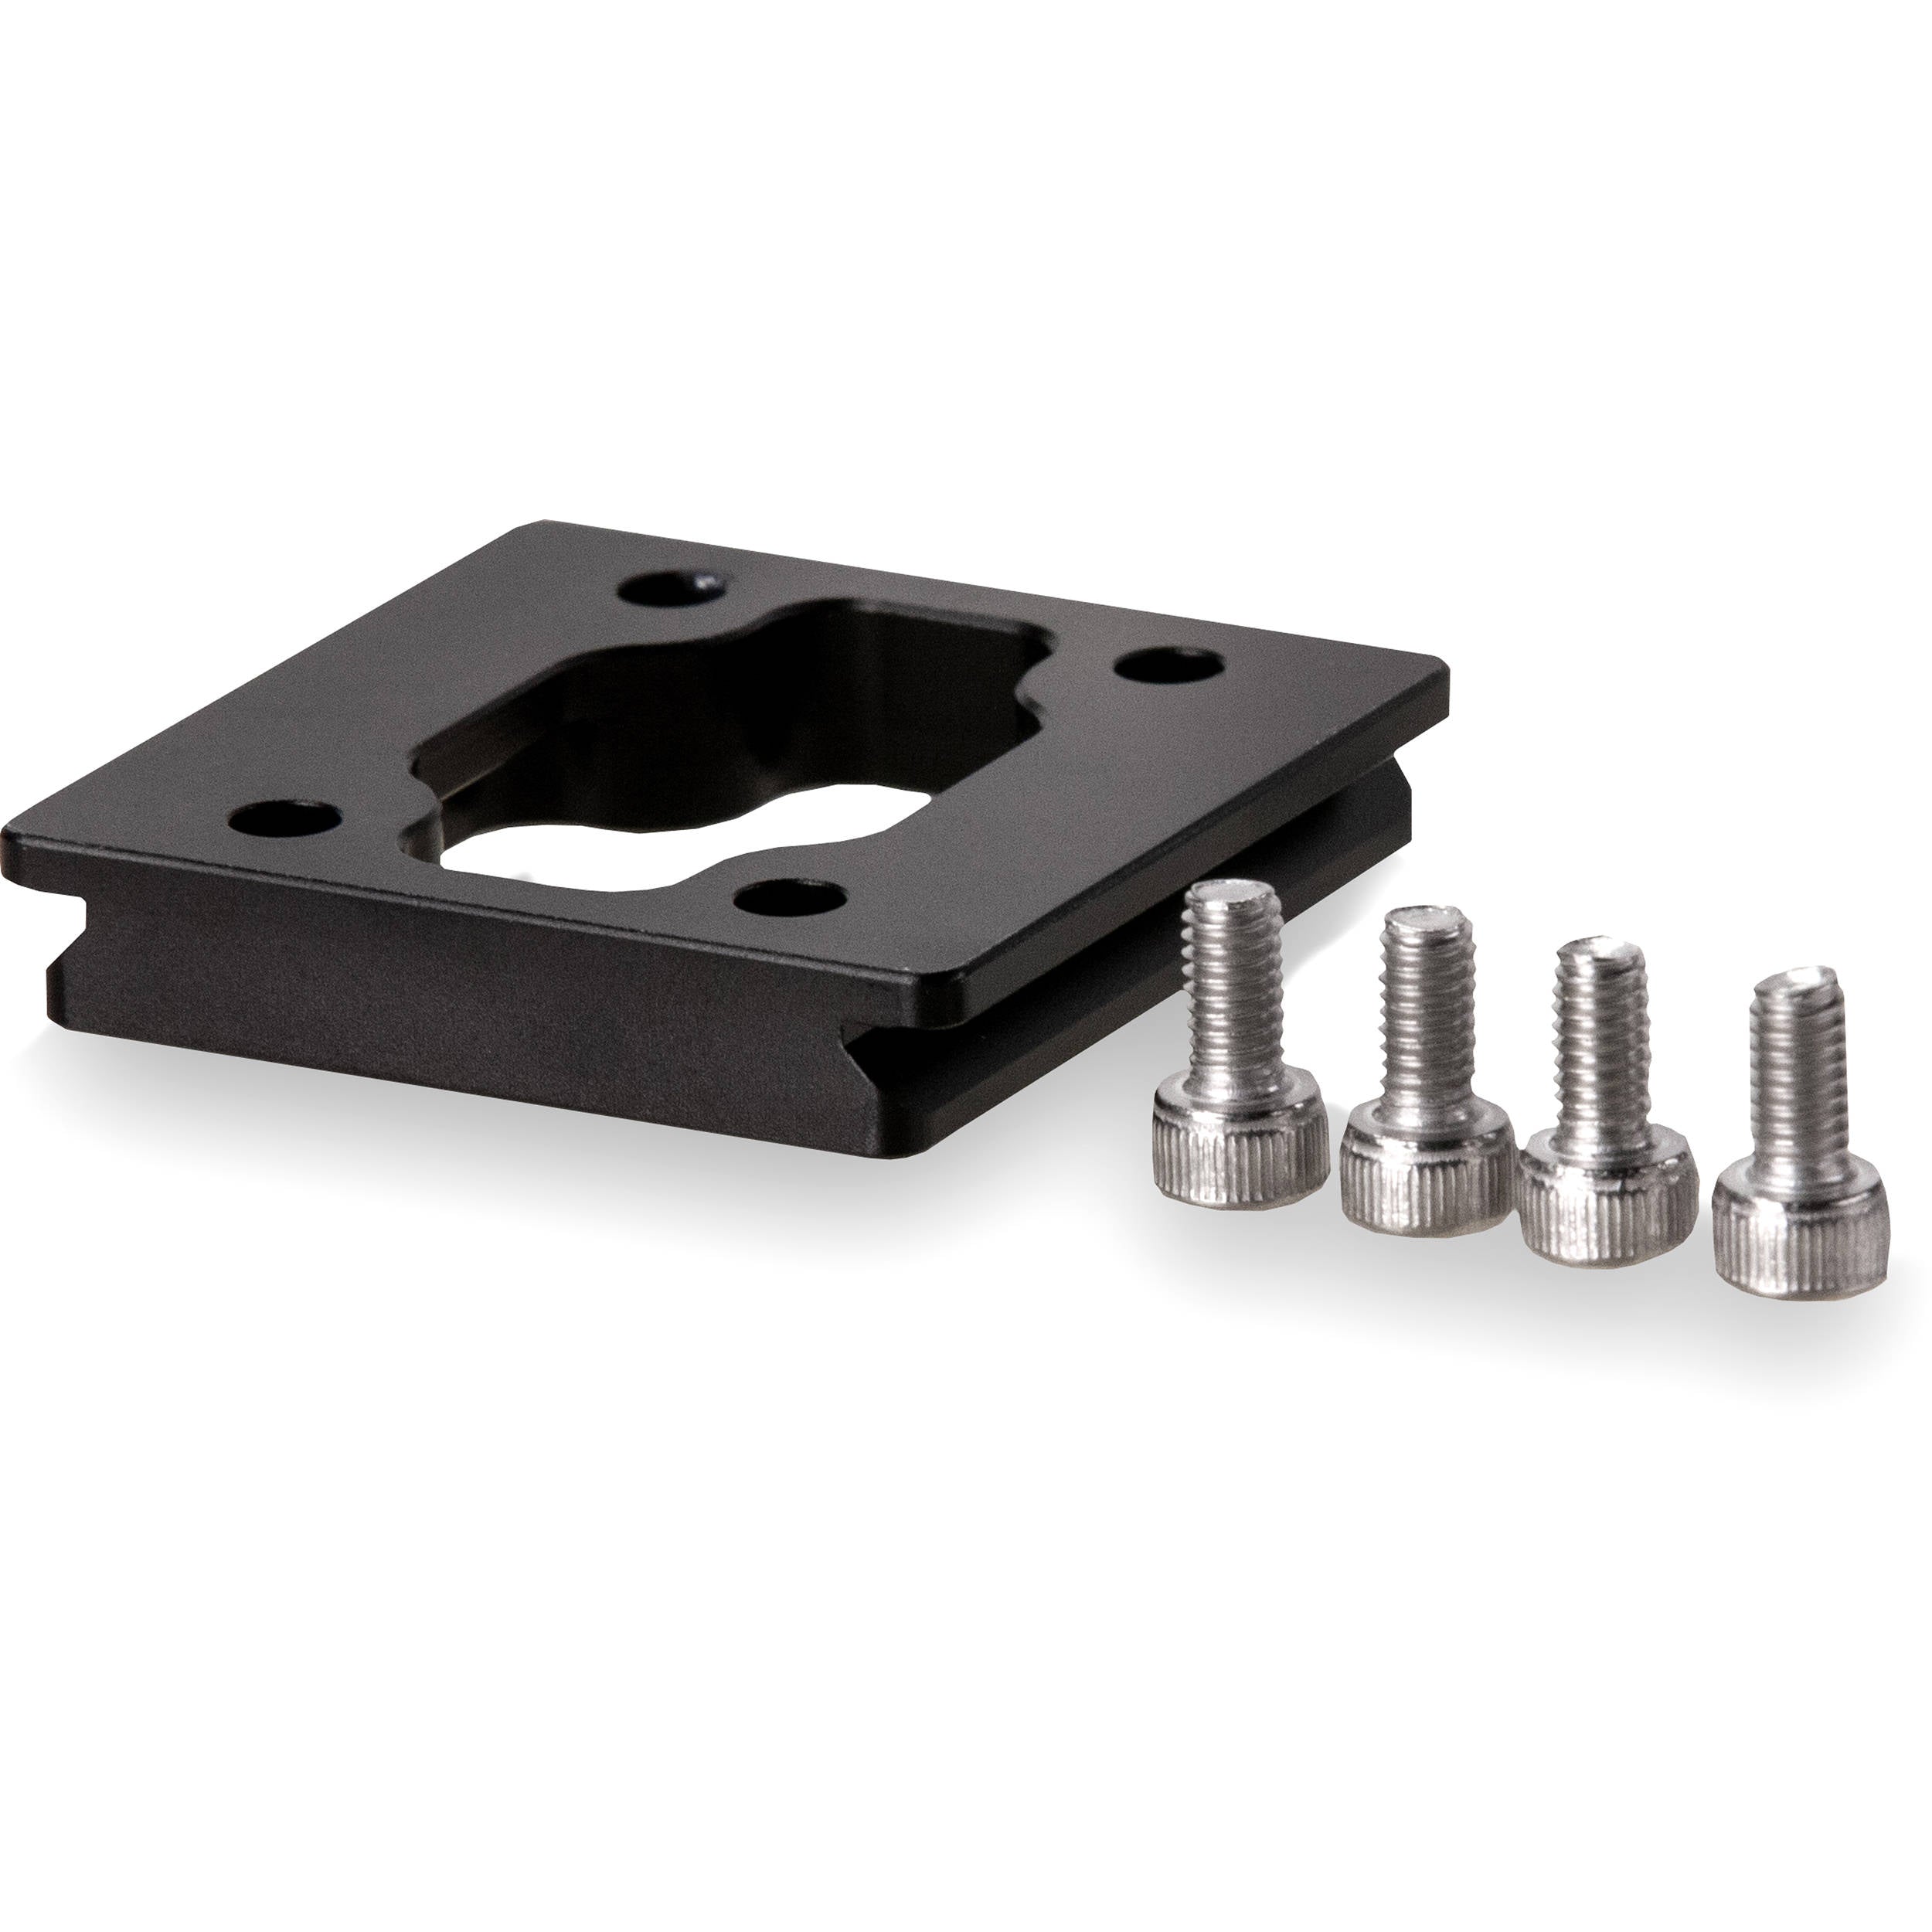 Tilta Arca-Swiss Quick Release Plate for Tiltaing Camera Cages (Black)